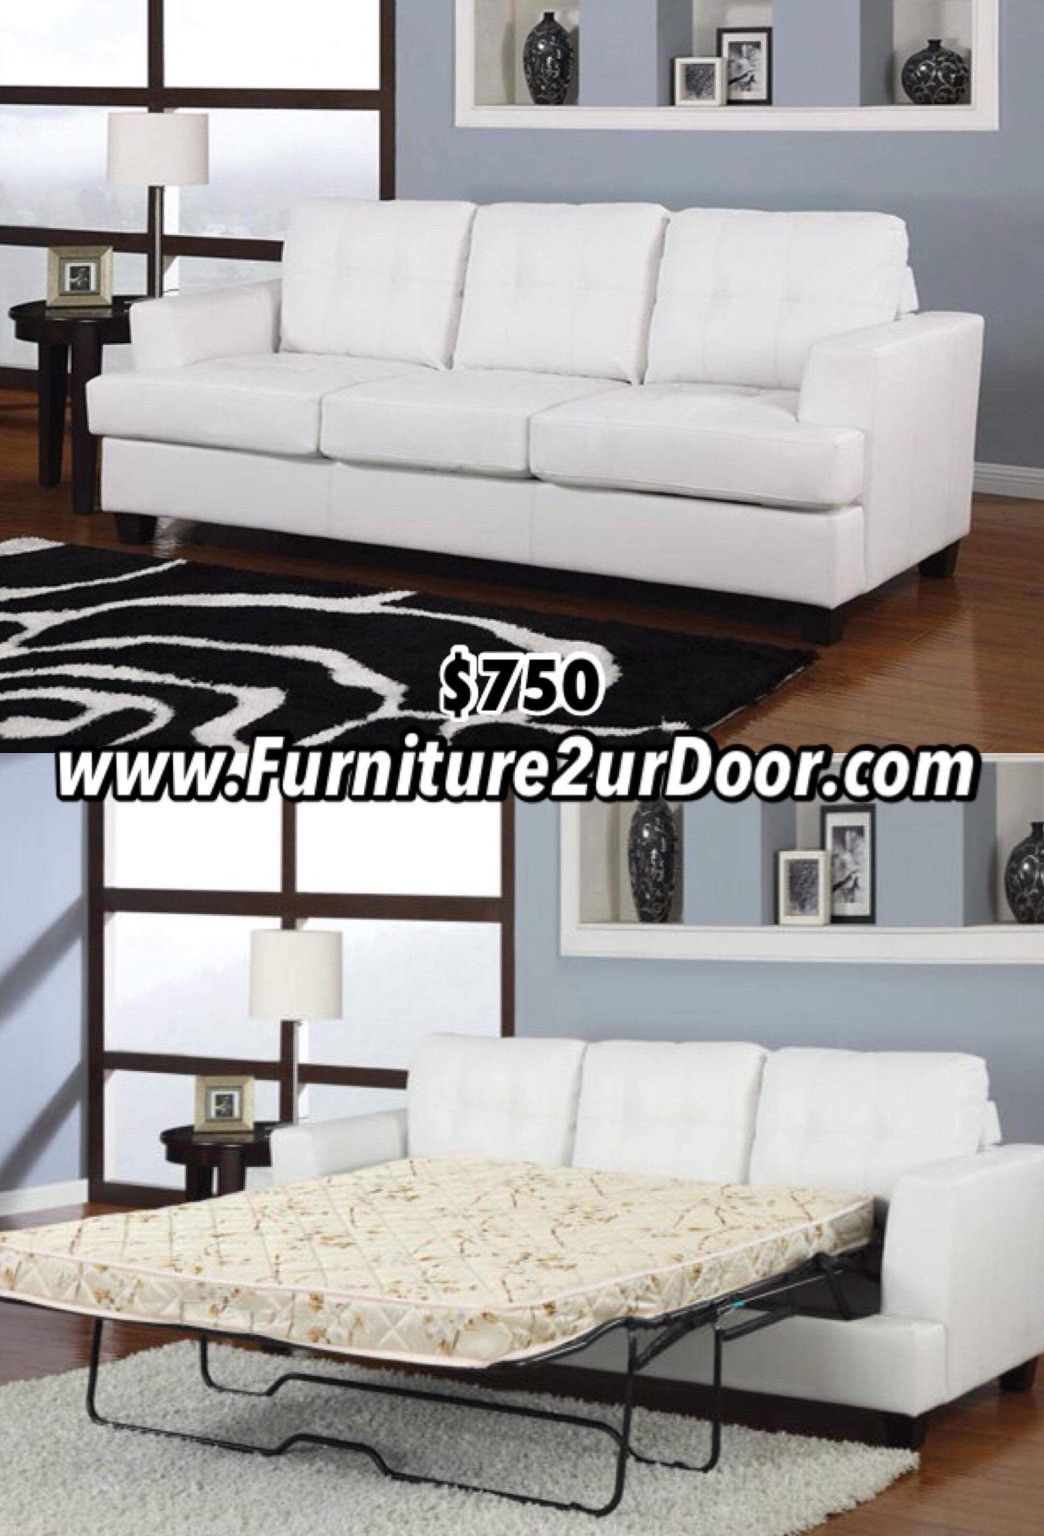 New white bonded leather sofa couch with QUEEN SIZE sleeper mattress